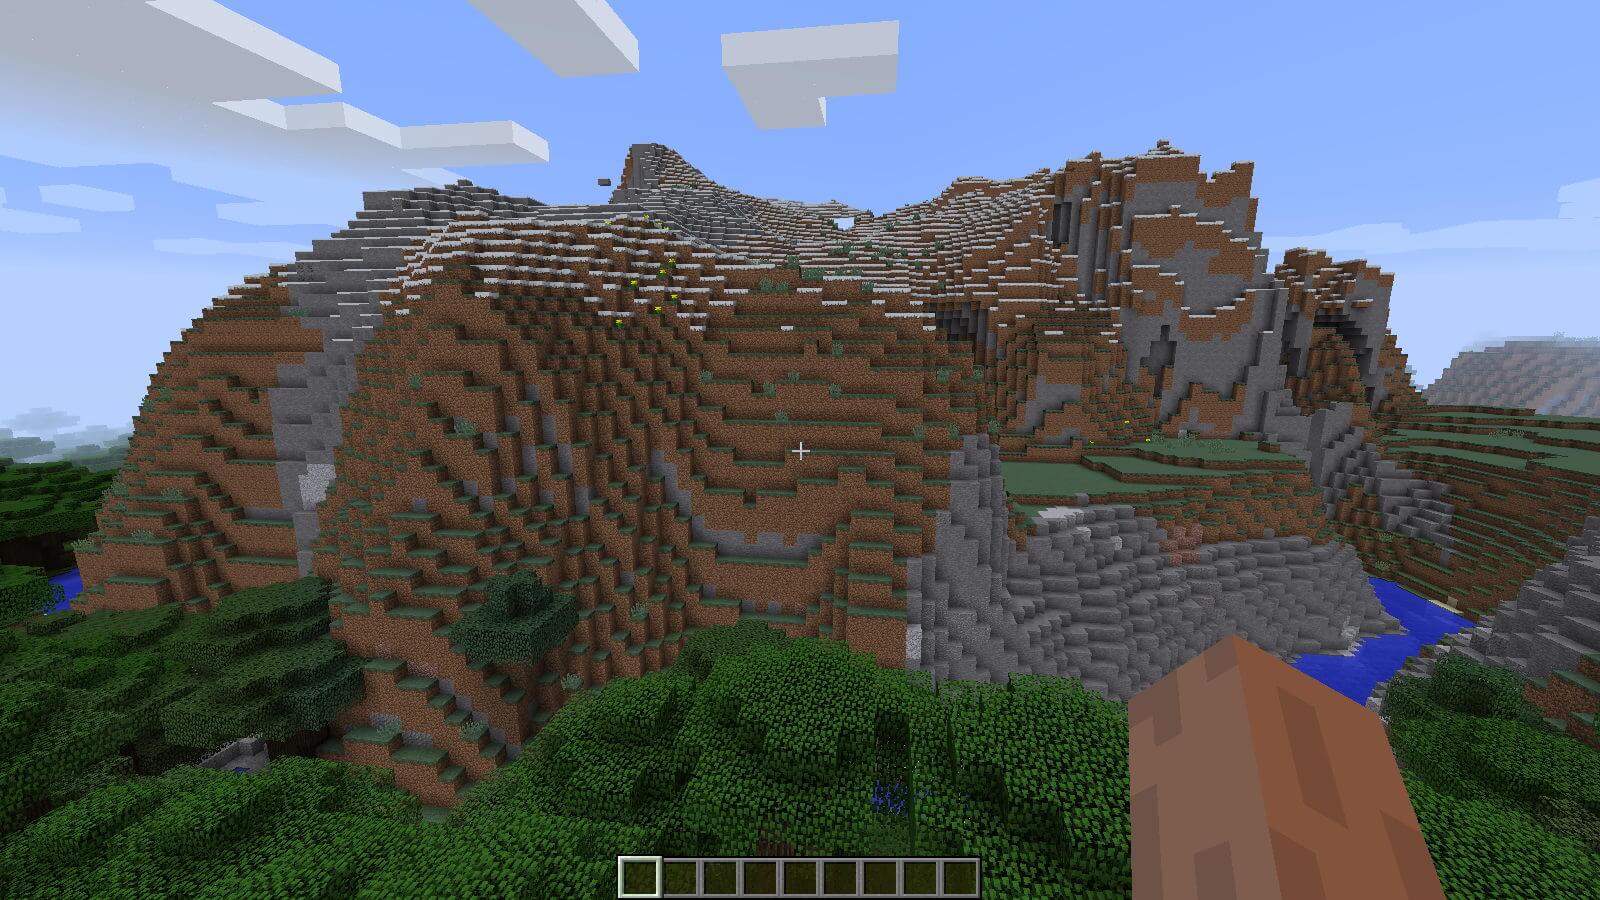 Village at the Foot of High Mountains screenshot 2